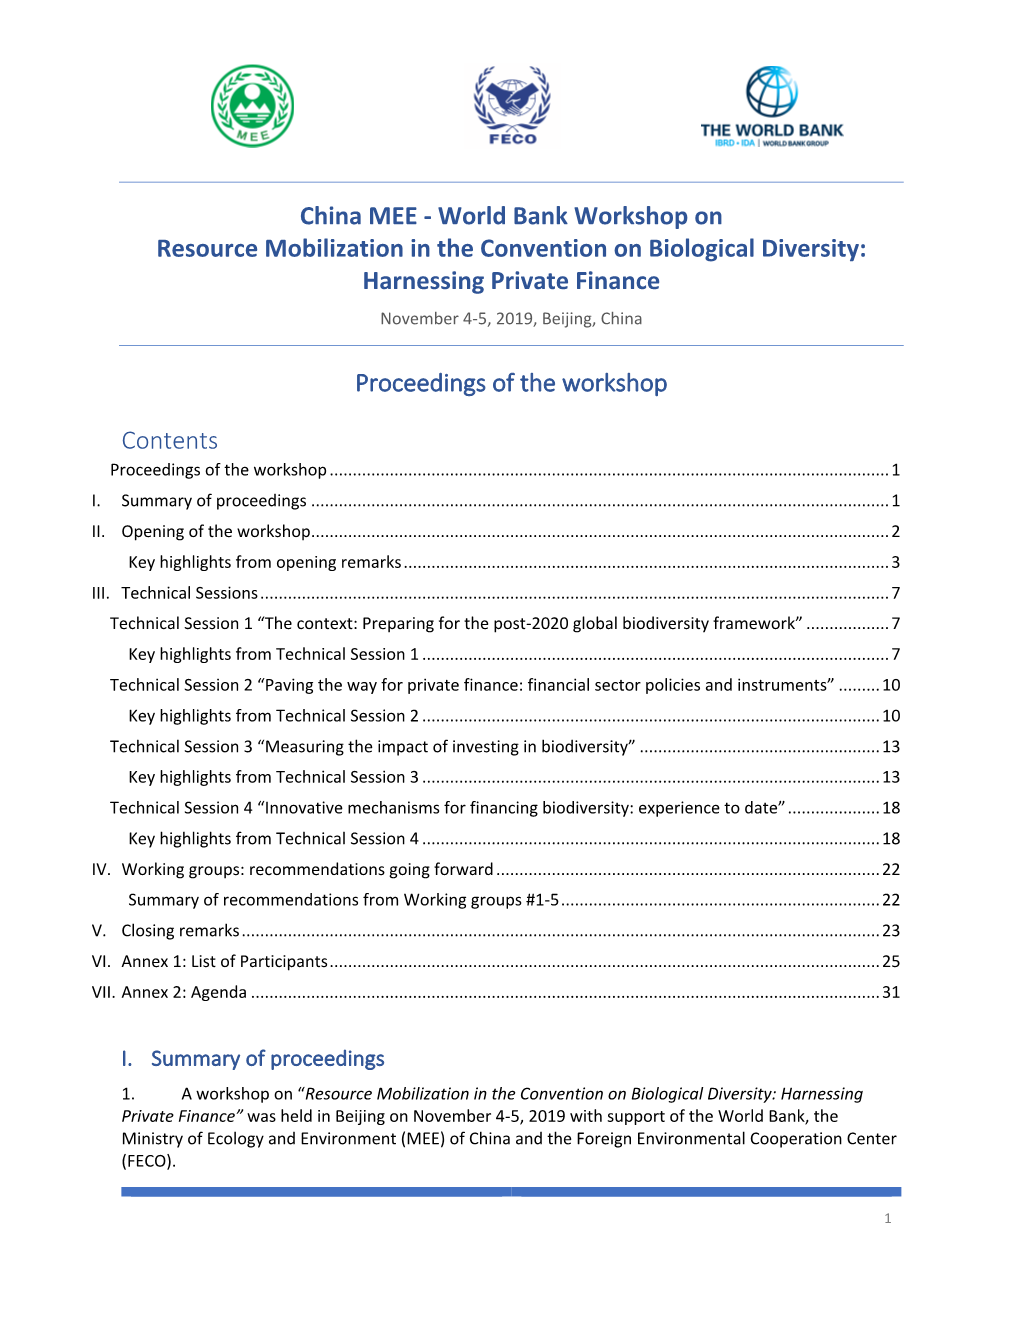 China MEE - World Bank Workshop on Resource Mobilization in the Convention on Biological Diversity: Harnessing Private Finance November 4-5, 2019, Beijing, China